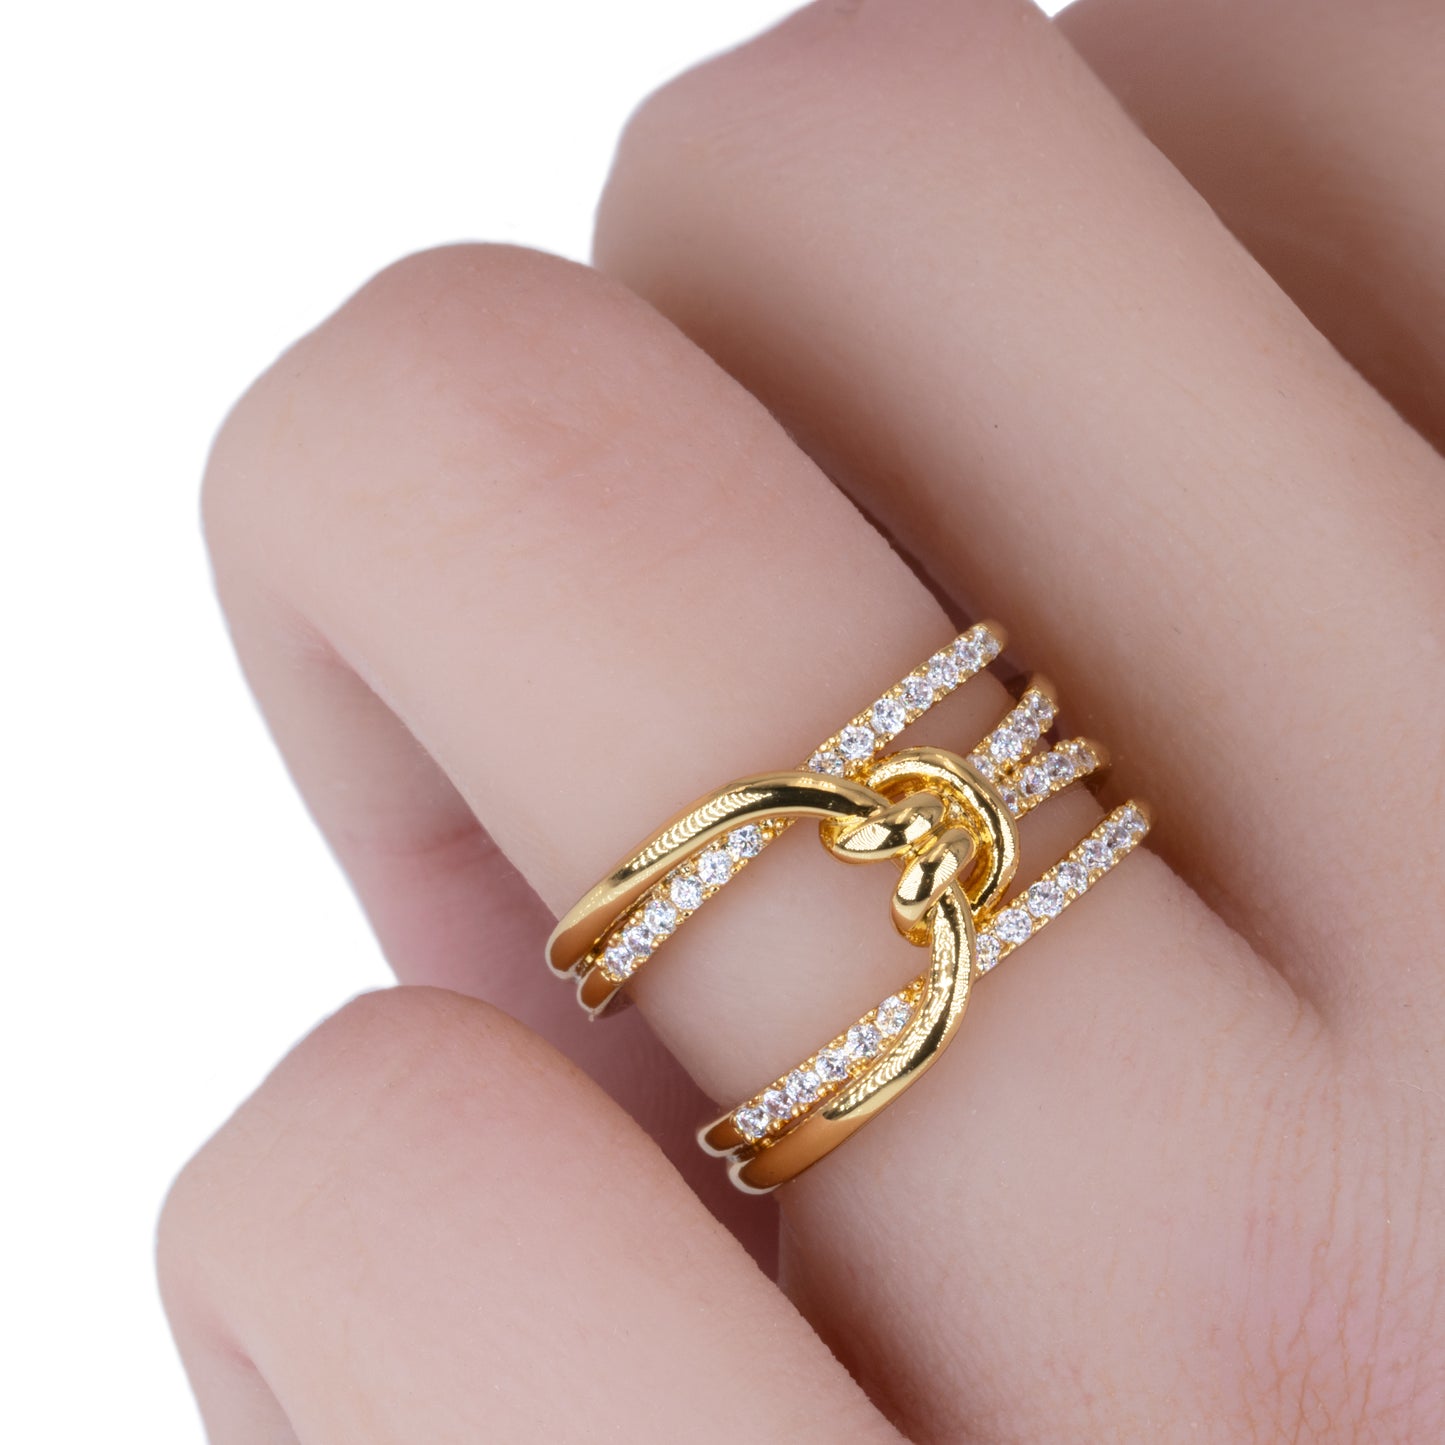 Statement Tie The Knot Ring